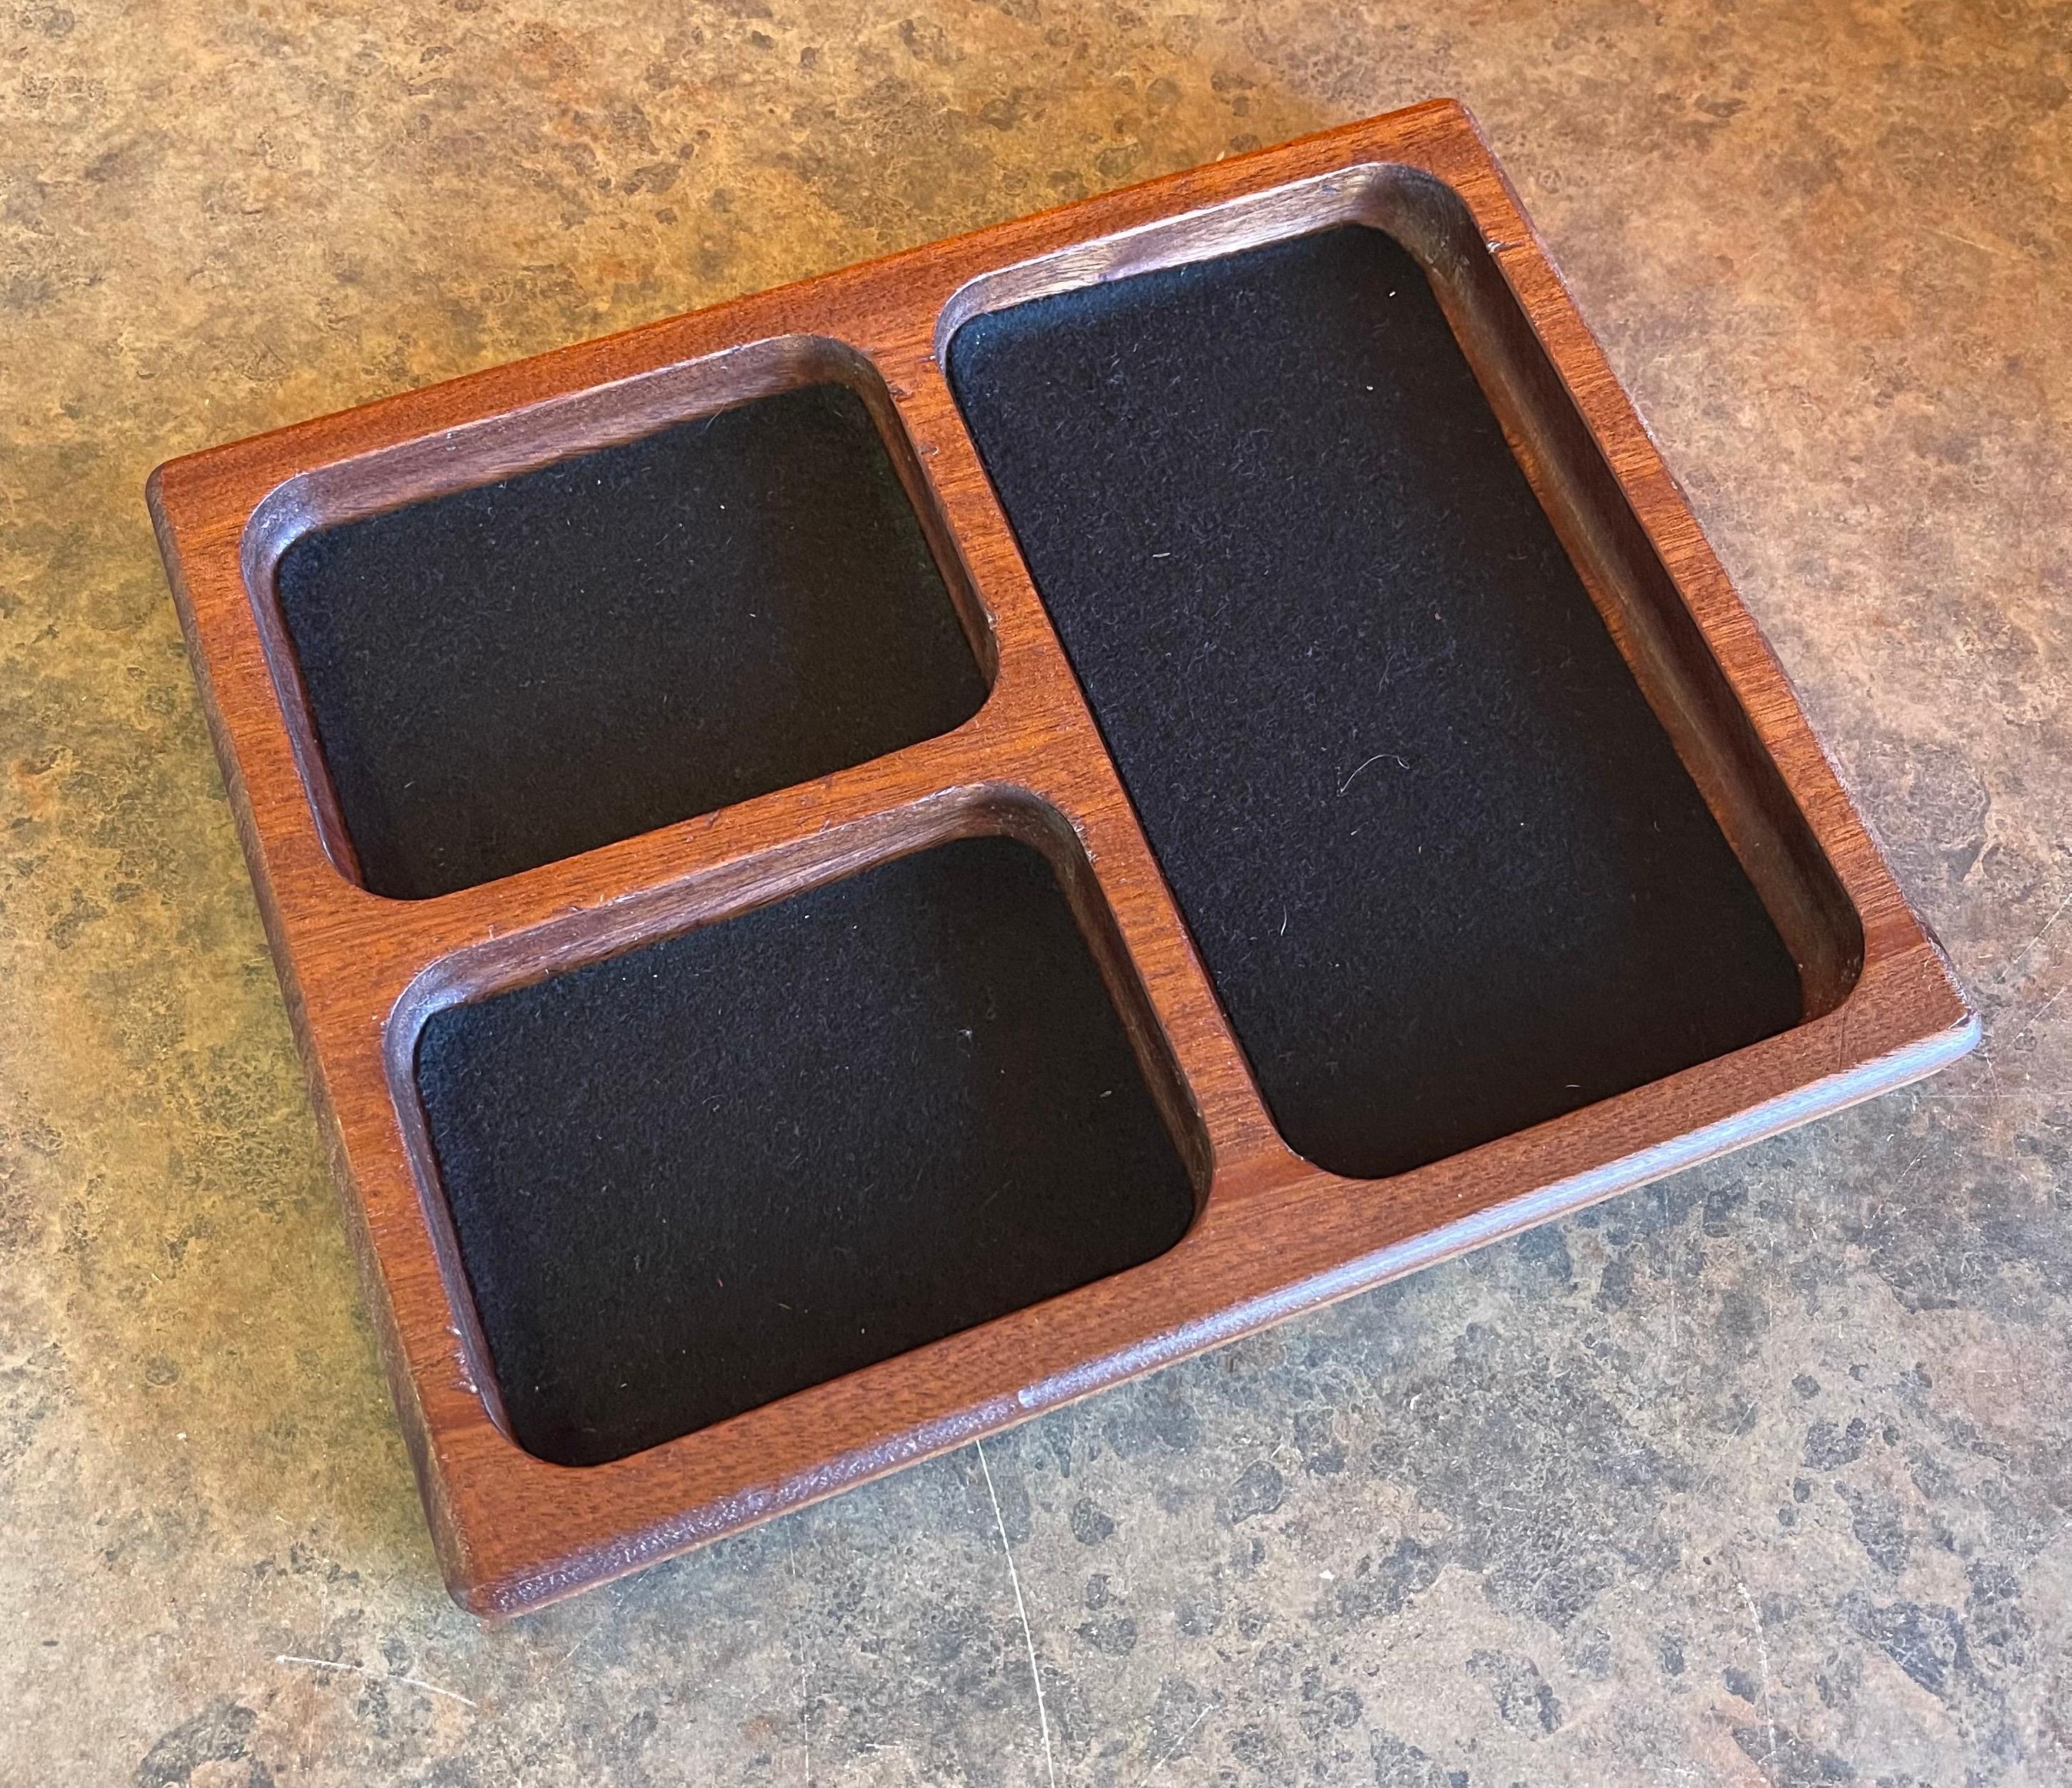 A fun midcentury walnut trinket tray / catch all, circa 1970s. The piece is in very good vintage condition and measures 8